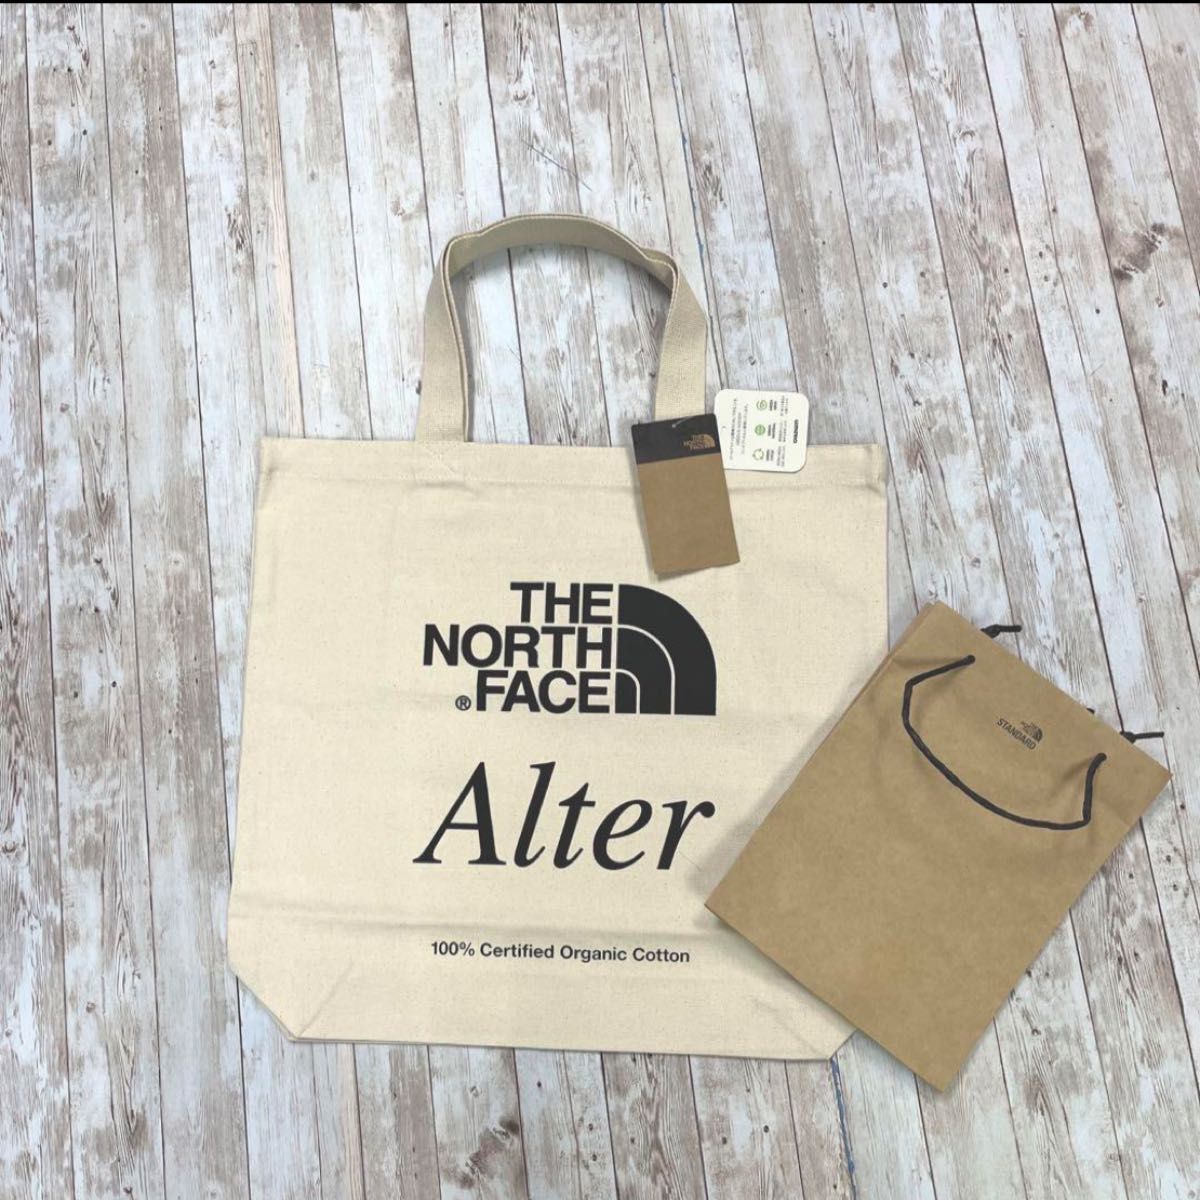 THE NORTH FACE ALTER コットントートバッグ 新品 紙袋付き